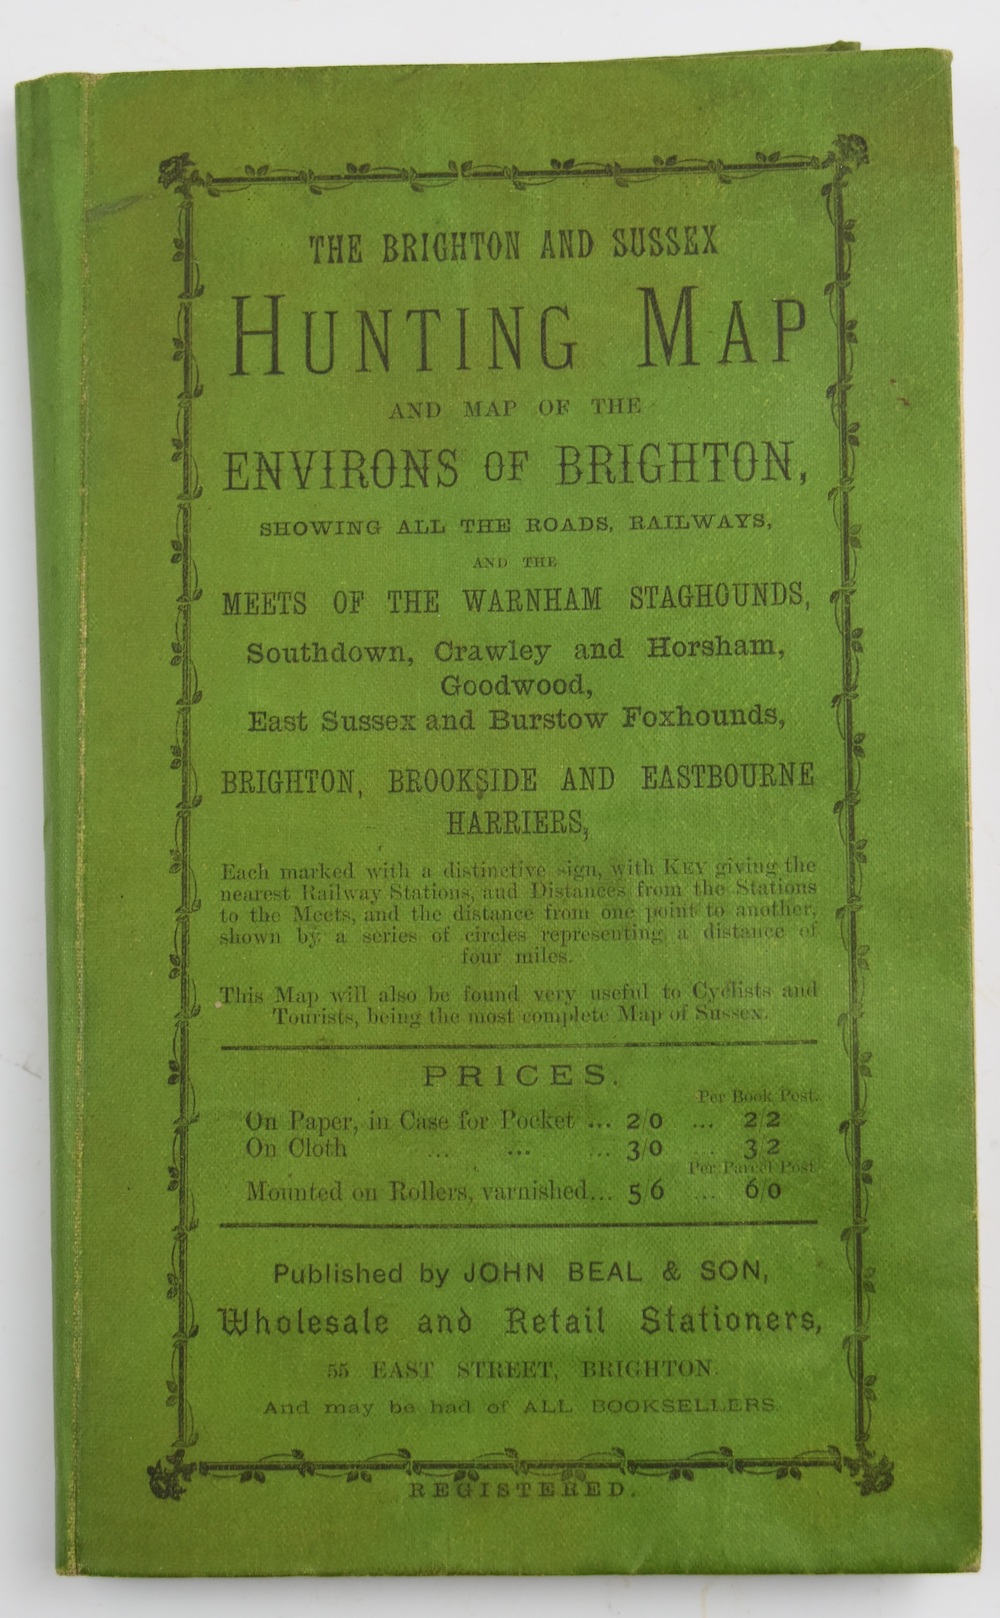 The Brighton And Sussex Hunting Map And Map Of The Environs Of Brighton, Showing All The Roads, Railways. Sold £60